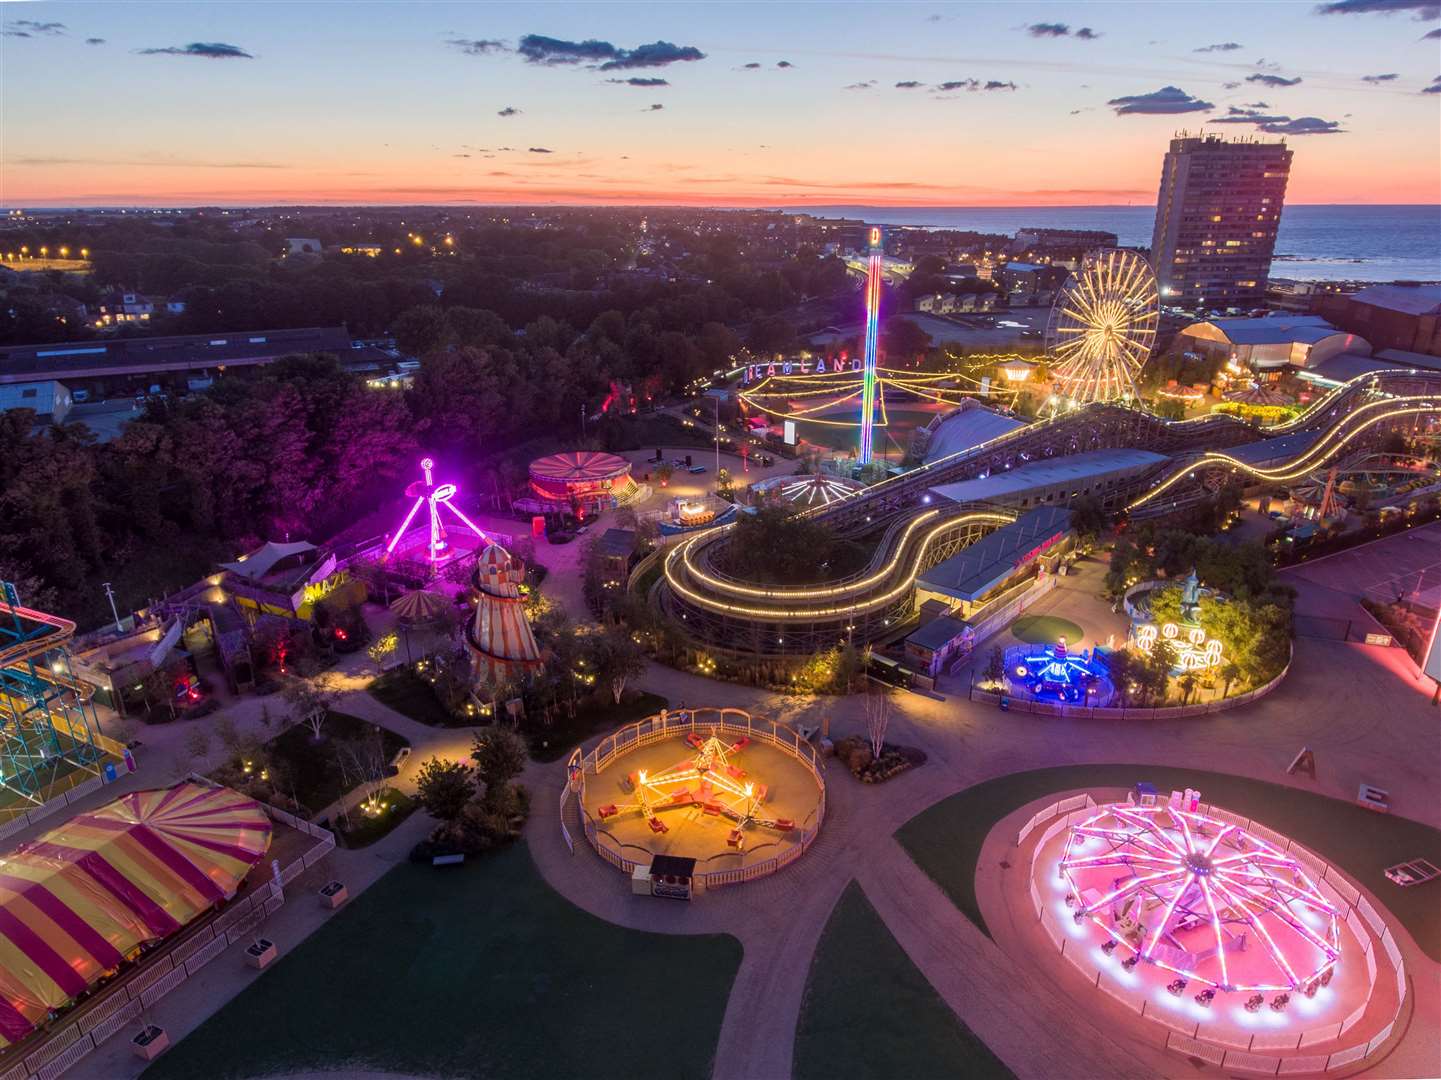 Dreamland has seen its most succesful year in 2019 with 700,000 visitors. Picture credit: Dreamland